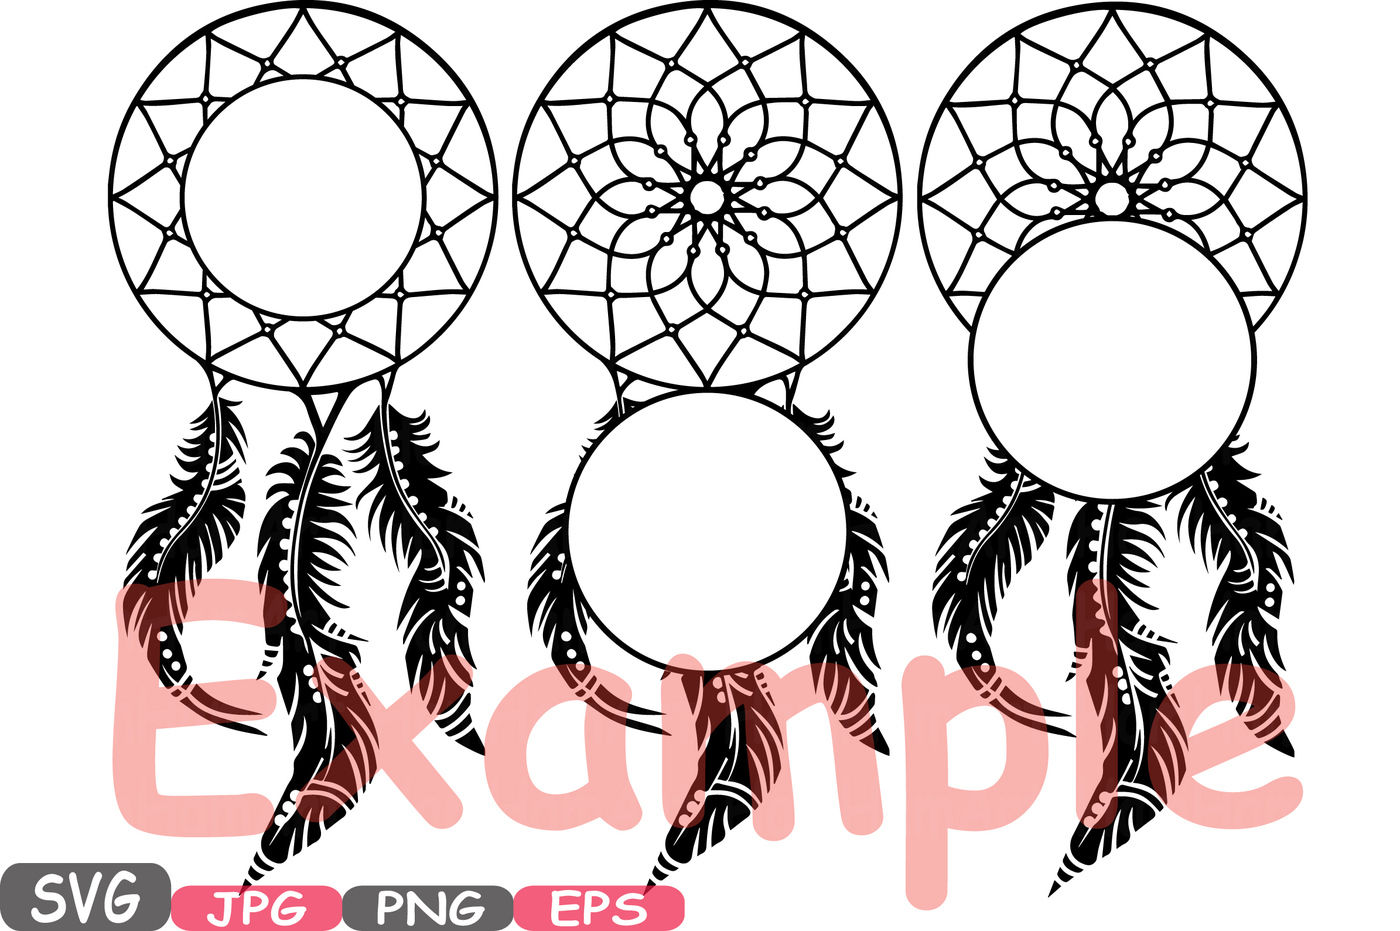 Download Dream Catcher Circle Svg Monogram Silhouette Cutting Files Svg Frame Clipart Boho Bohemian Dream Designs Feathers Pack Indian Native 500s By Hamhamart Thehungryjpeg Com